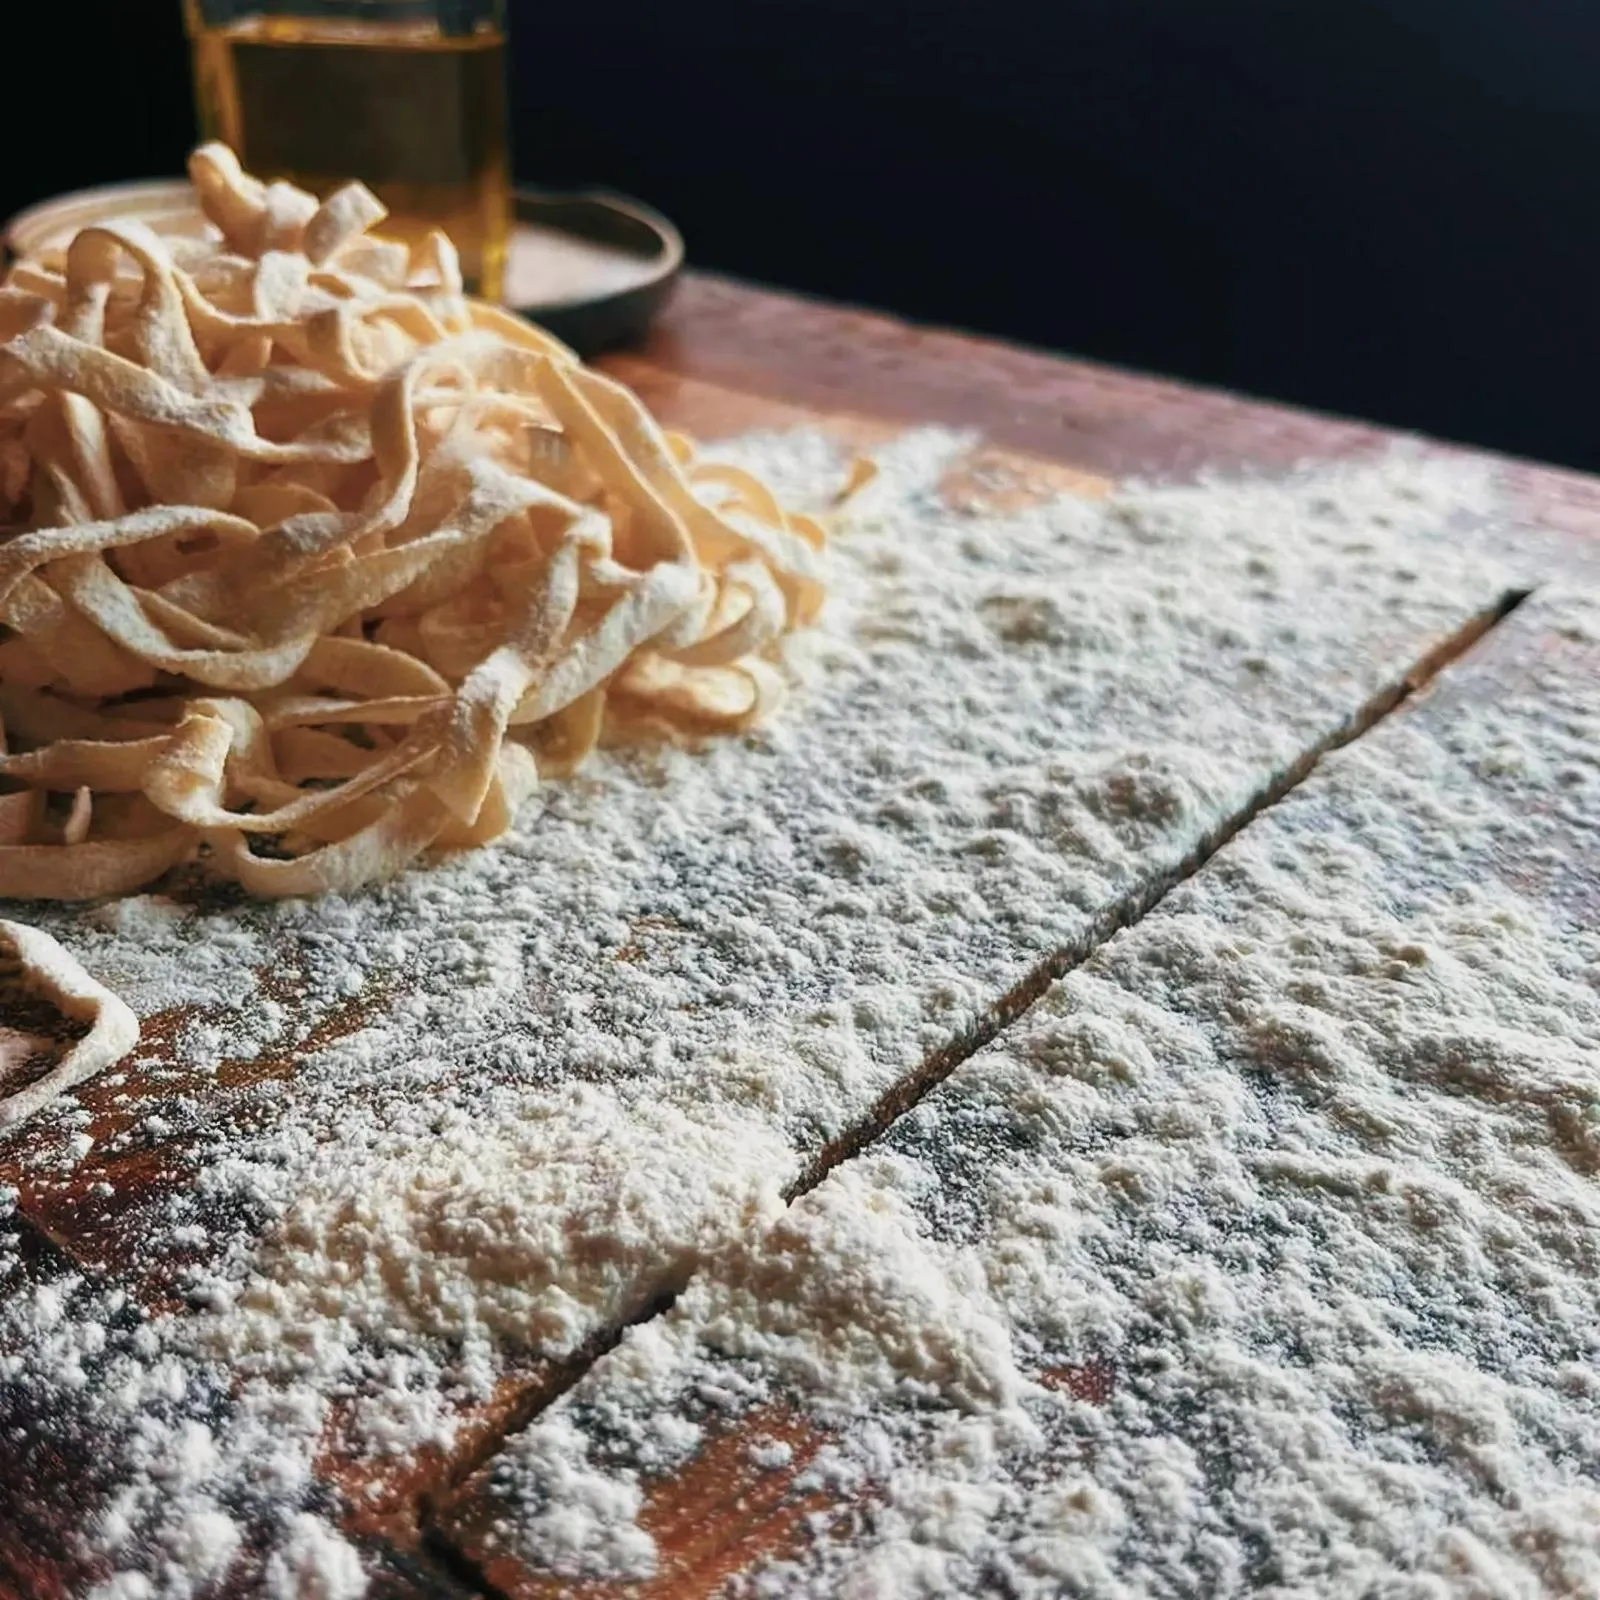 A plate of Tagliolini pasta, ready to be twirled.